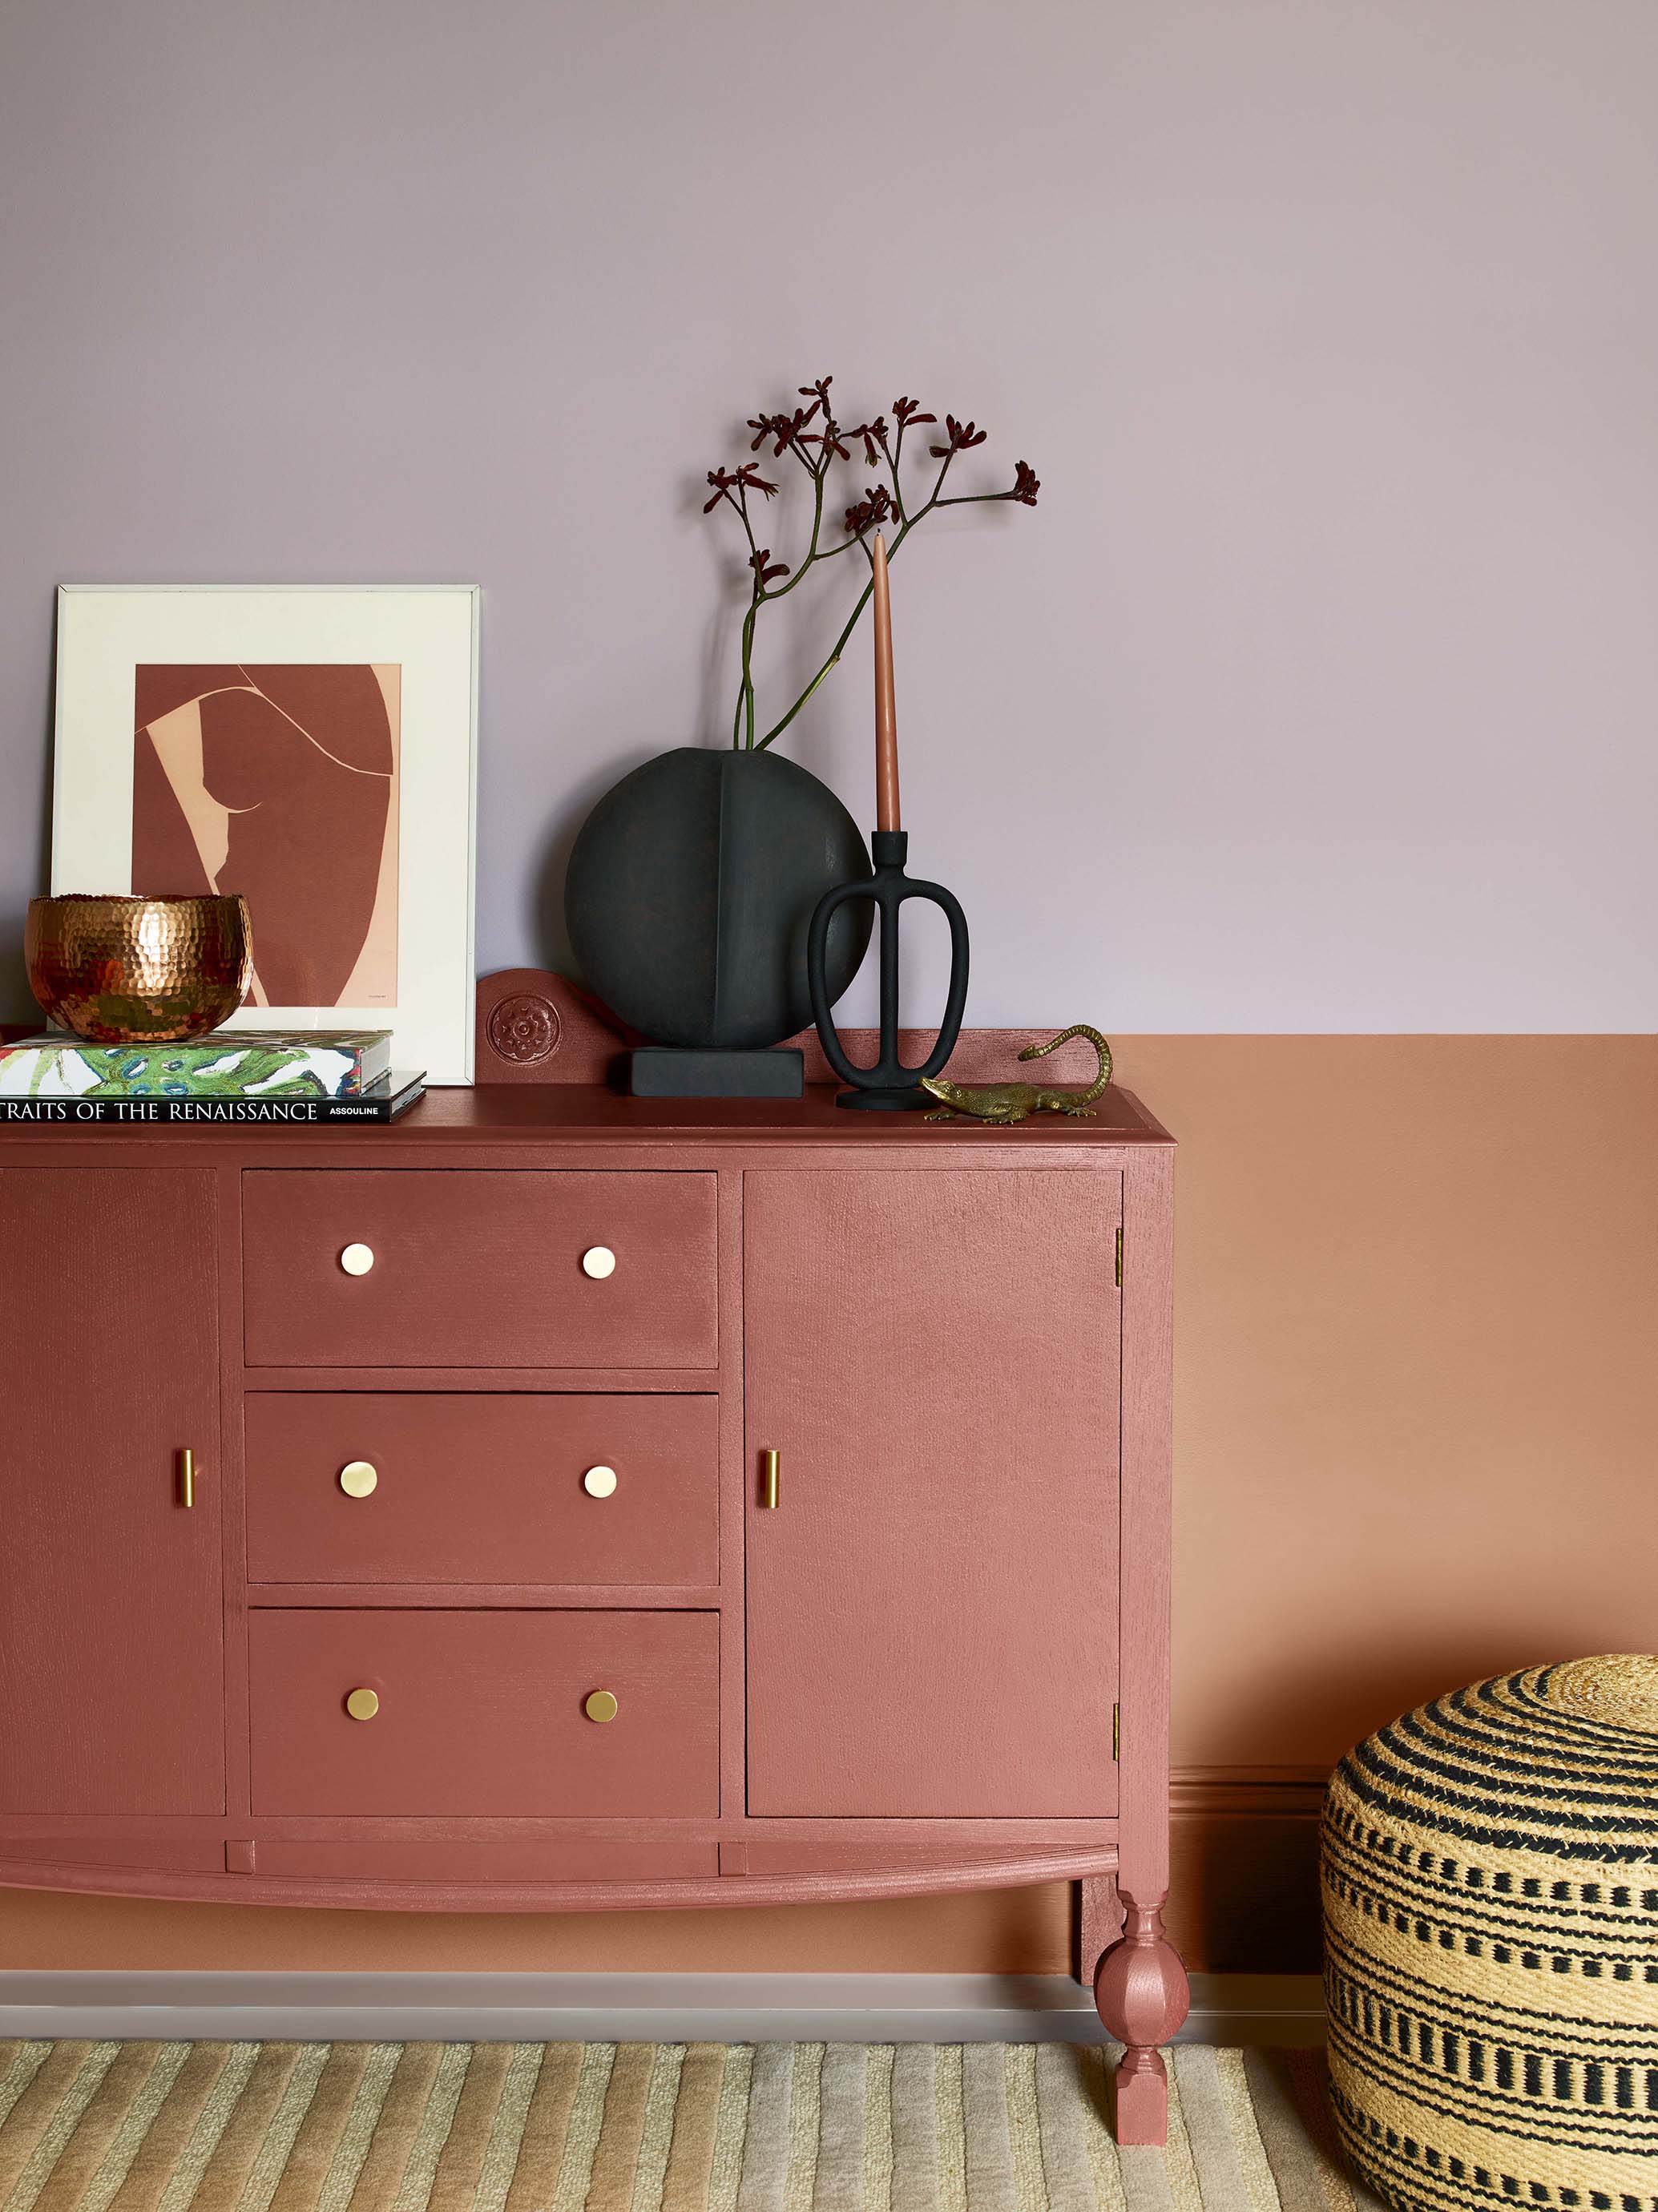 Dulux Heritage Dusted Heather, Red Sand, Red Ochre